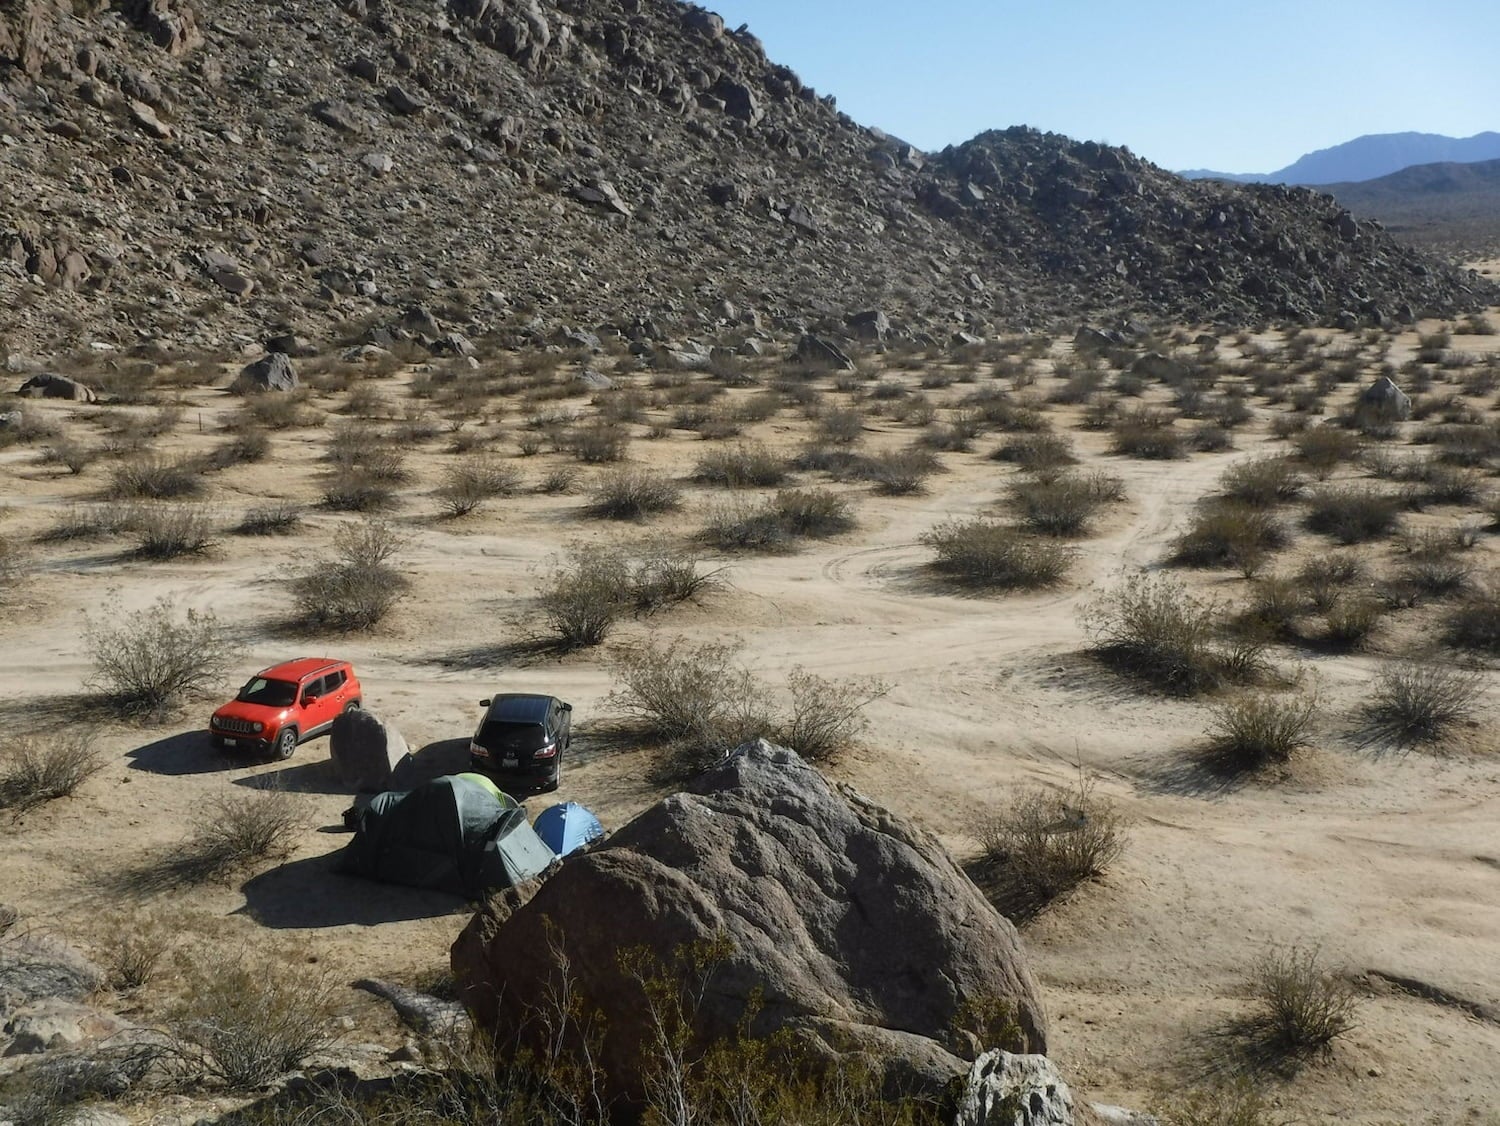 cars camped on the desert floor